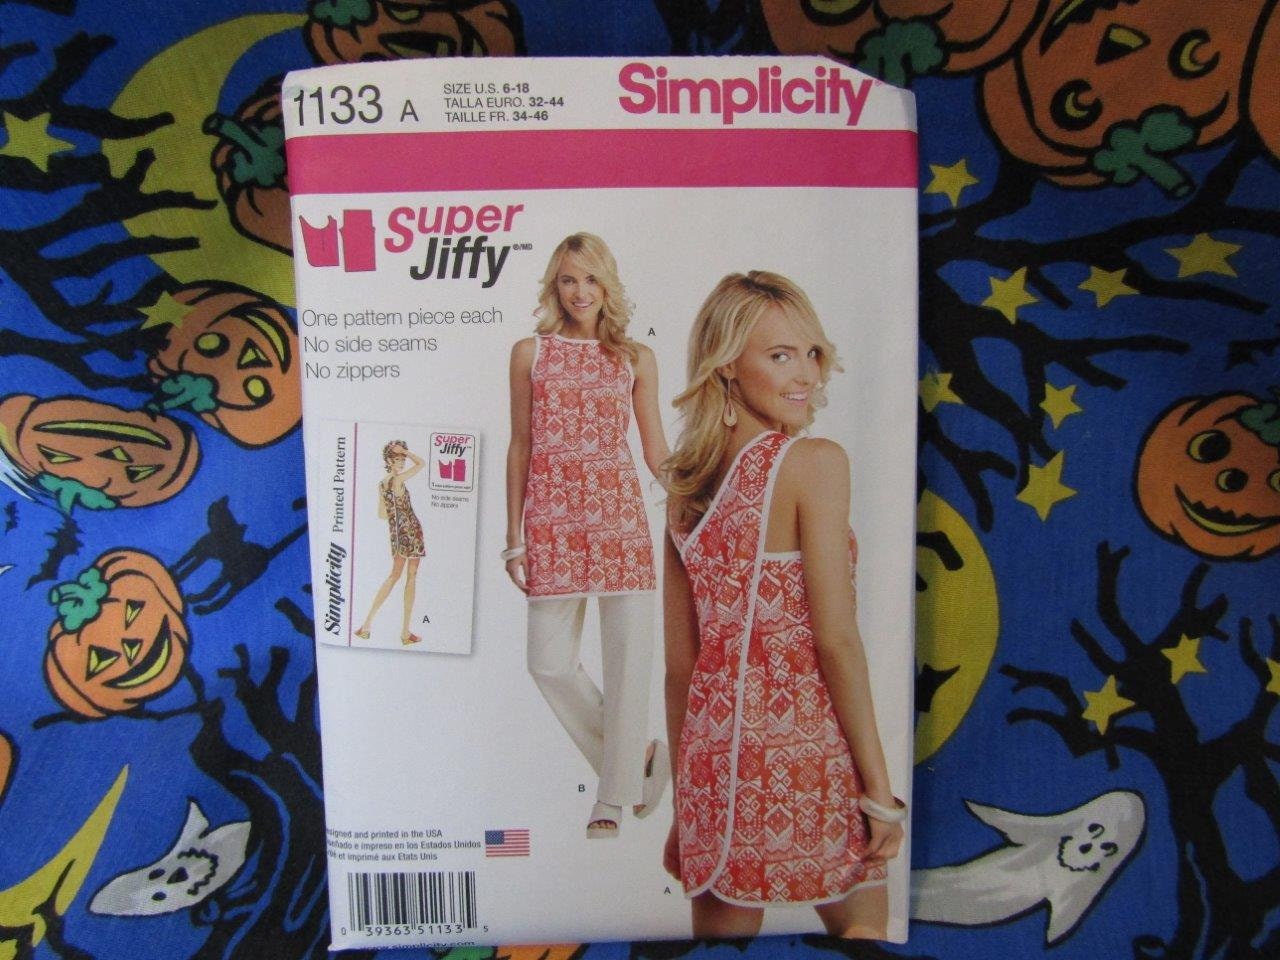 Simplicity Sewing Pattern 1133 Misses' Super Jiffy Tunic - Etsy